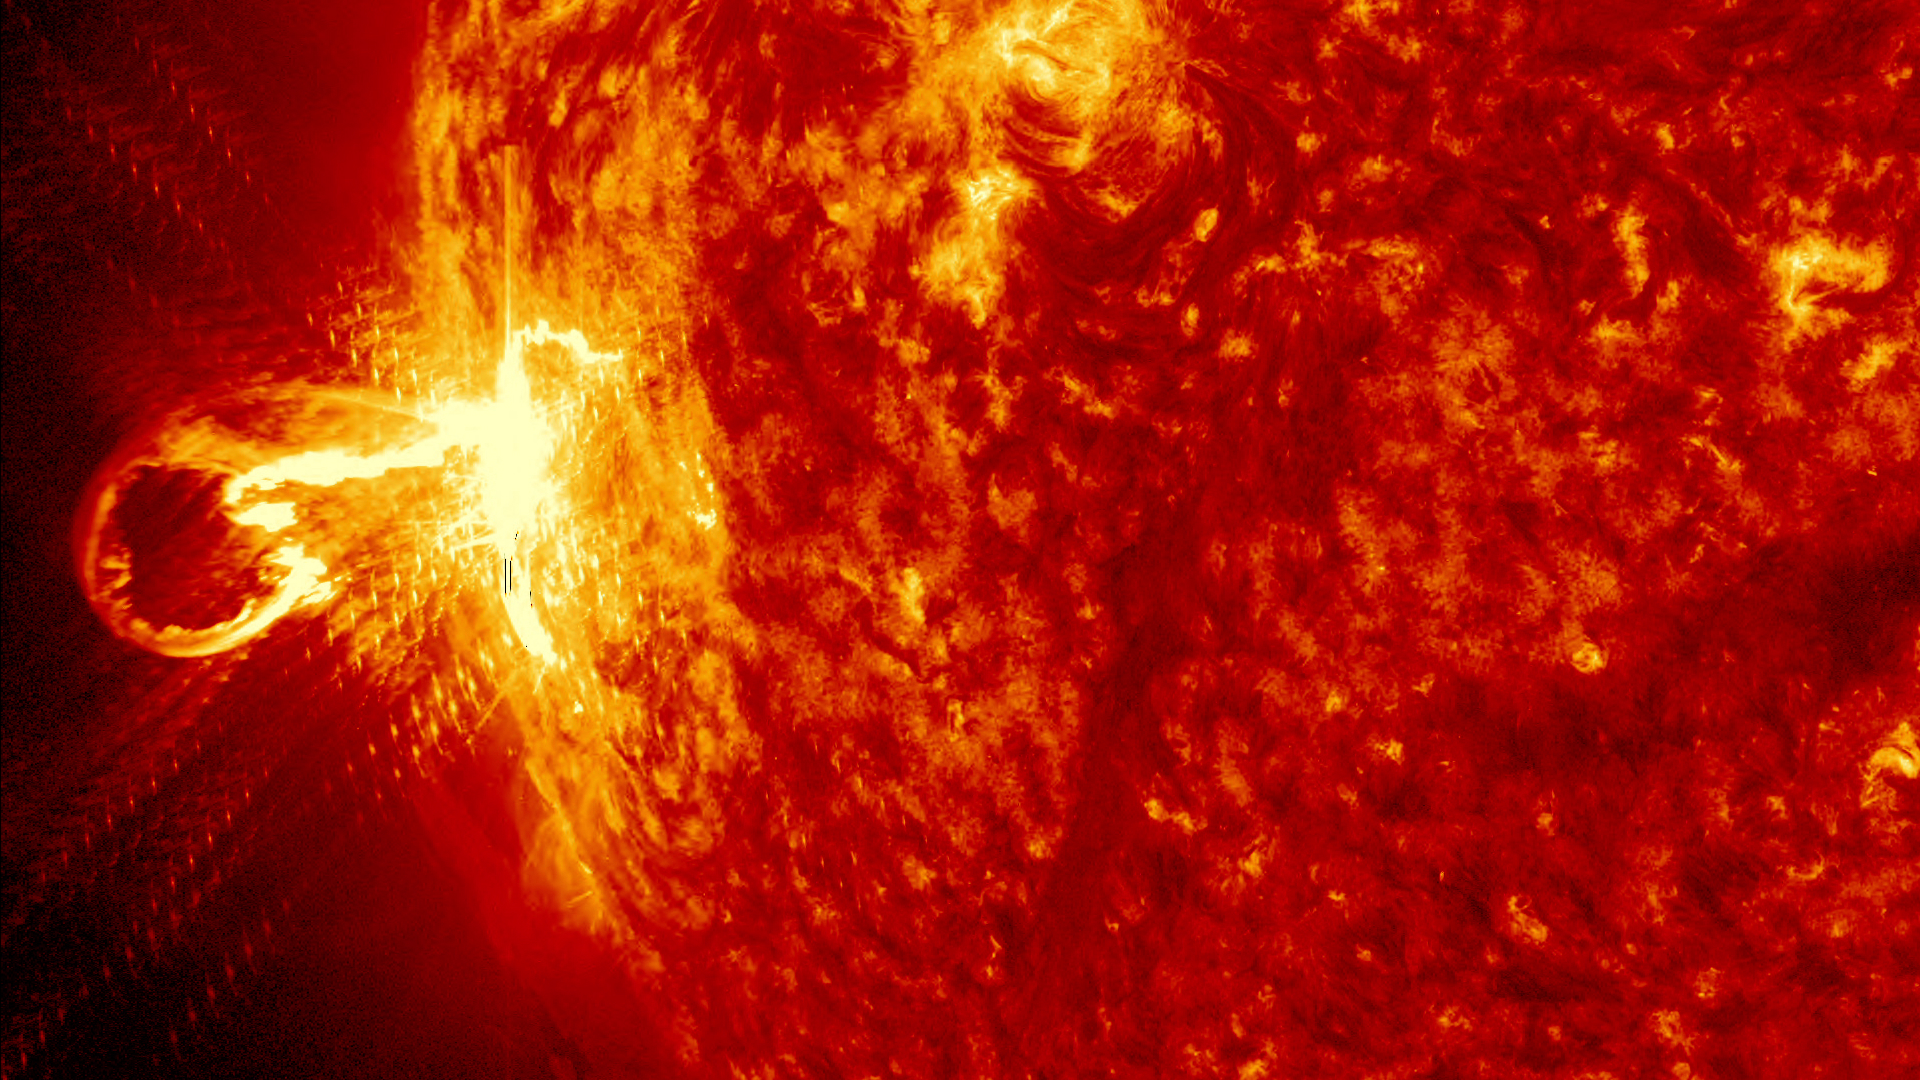 Preview Image for NASA's SDO Provides Images of Significant Solar Flare